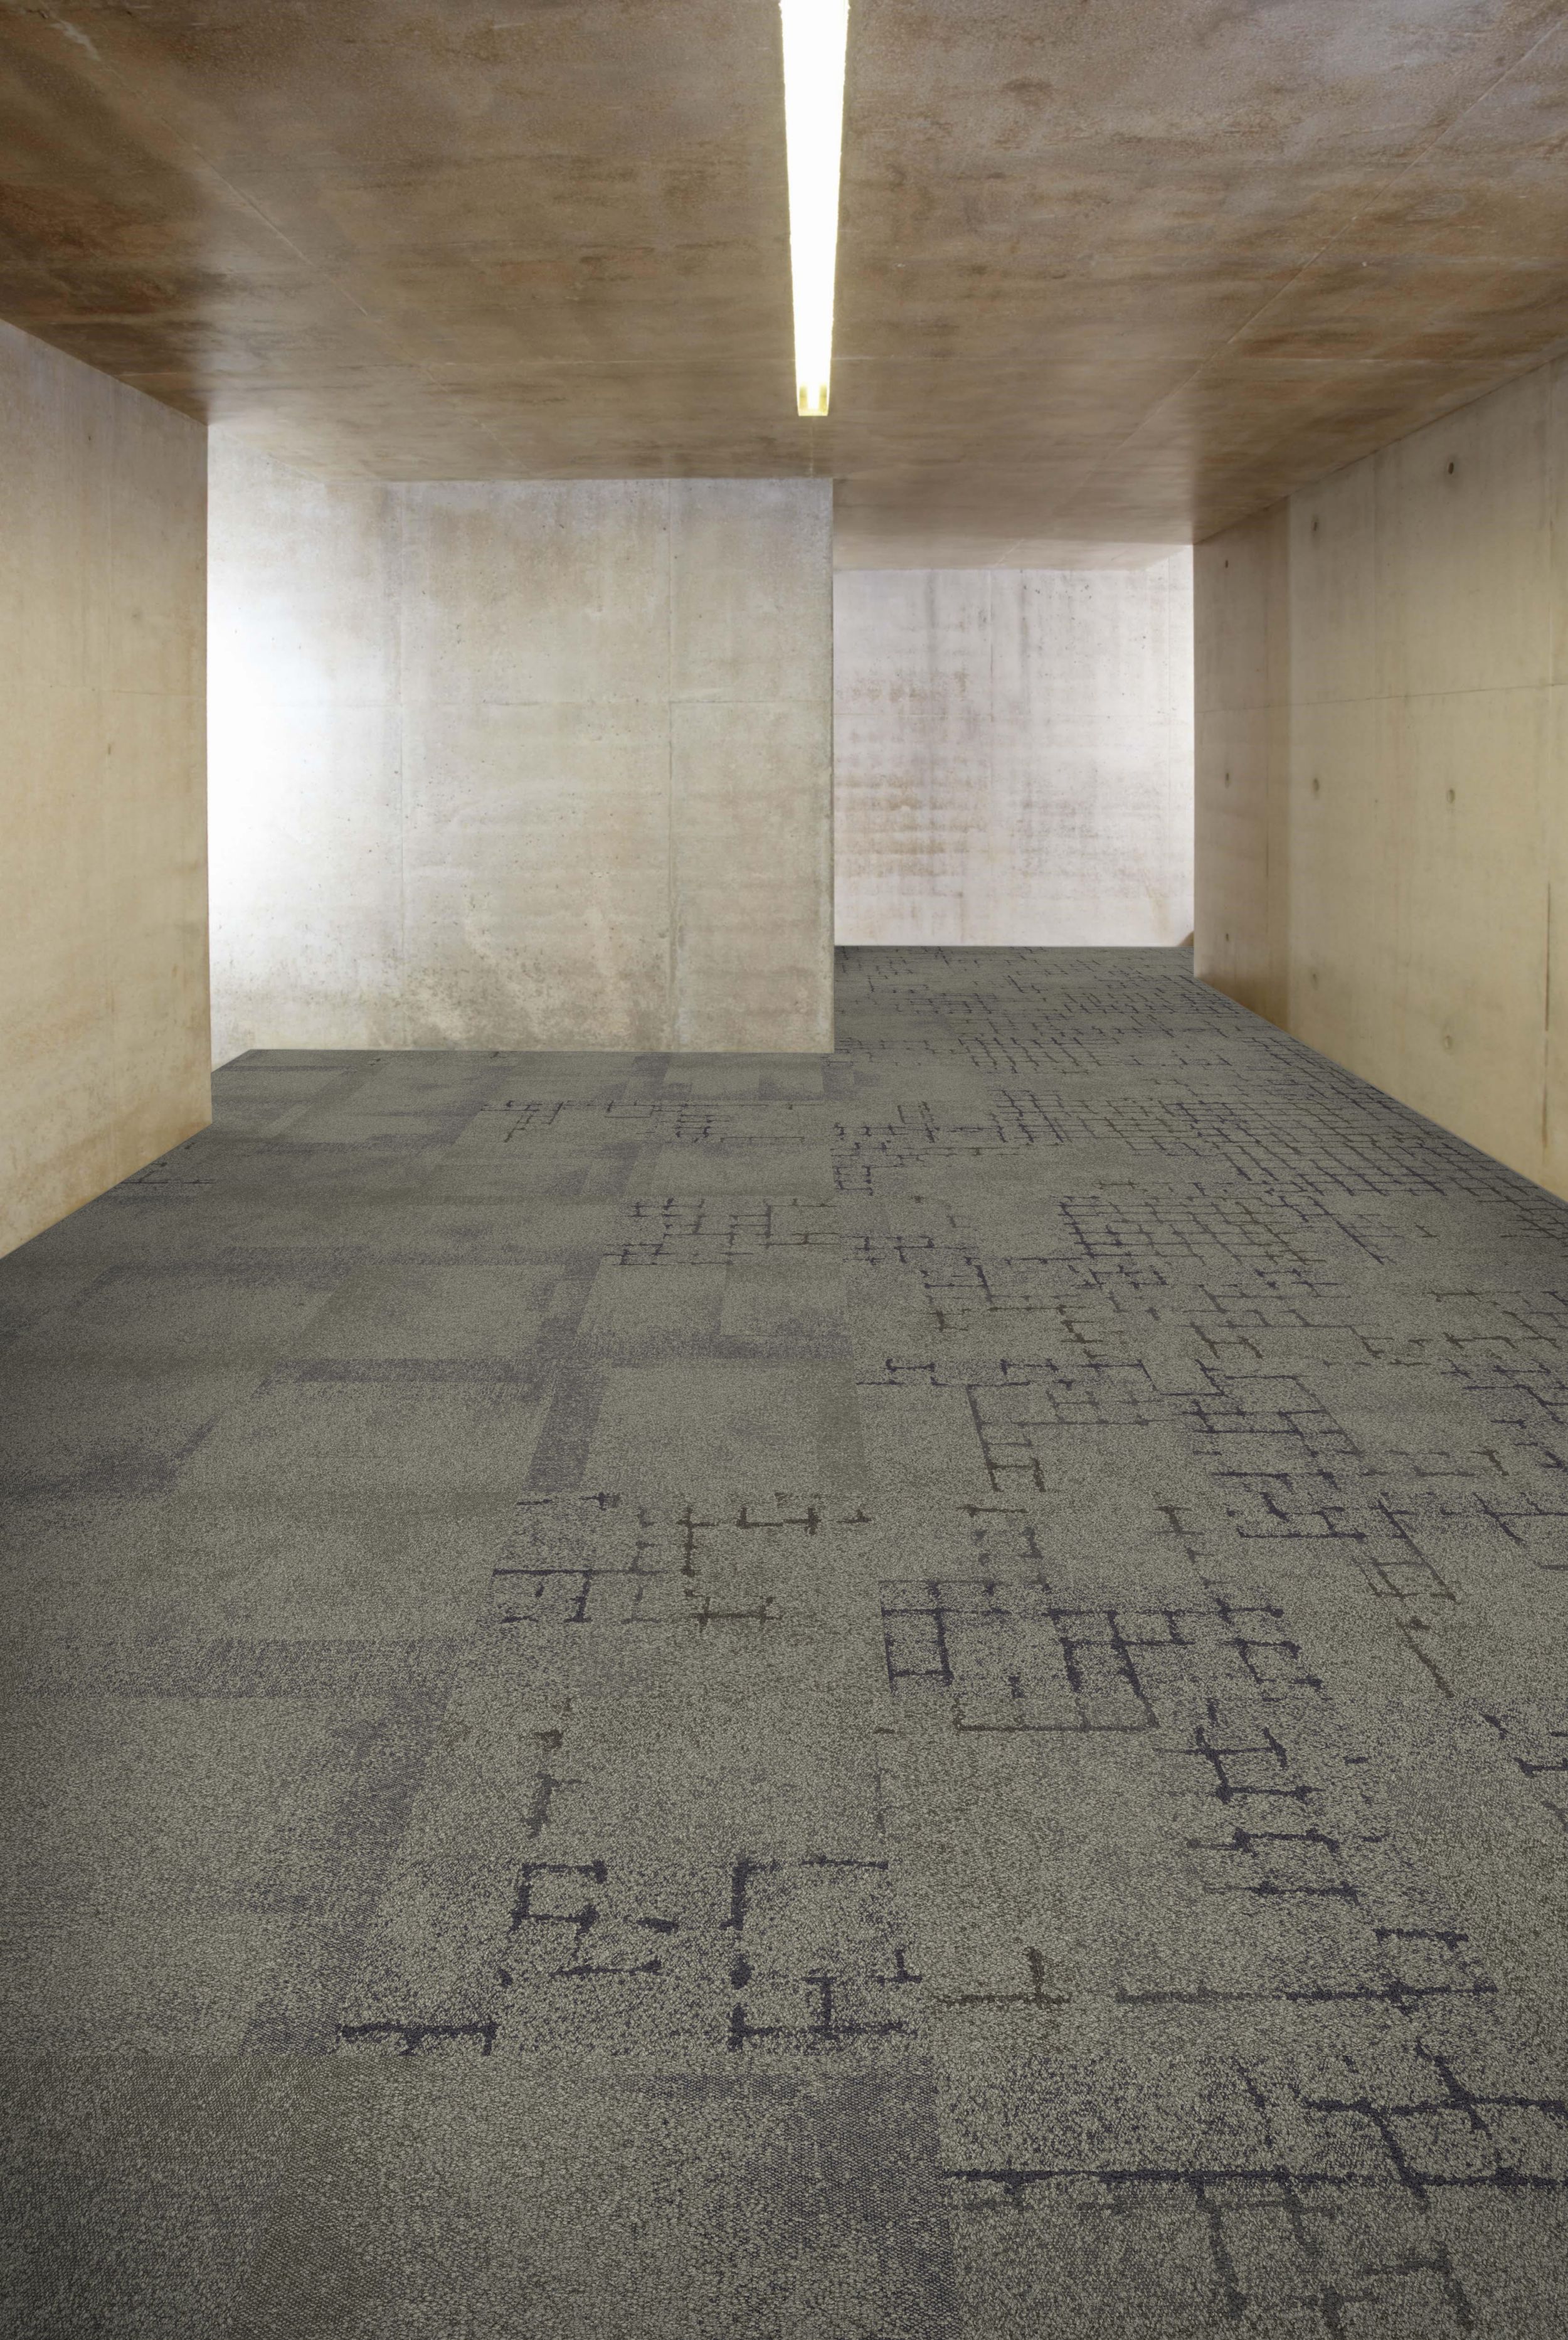 Interface Flagstone, Kerbstone and Sett in Stone carpet tile in corridor with concrete walls and ceiling Bildnummer 5